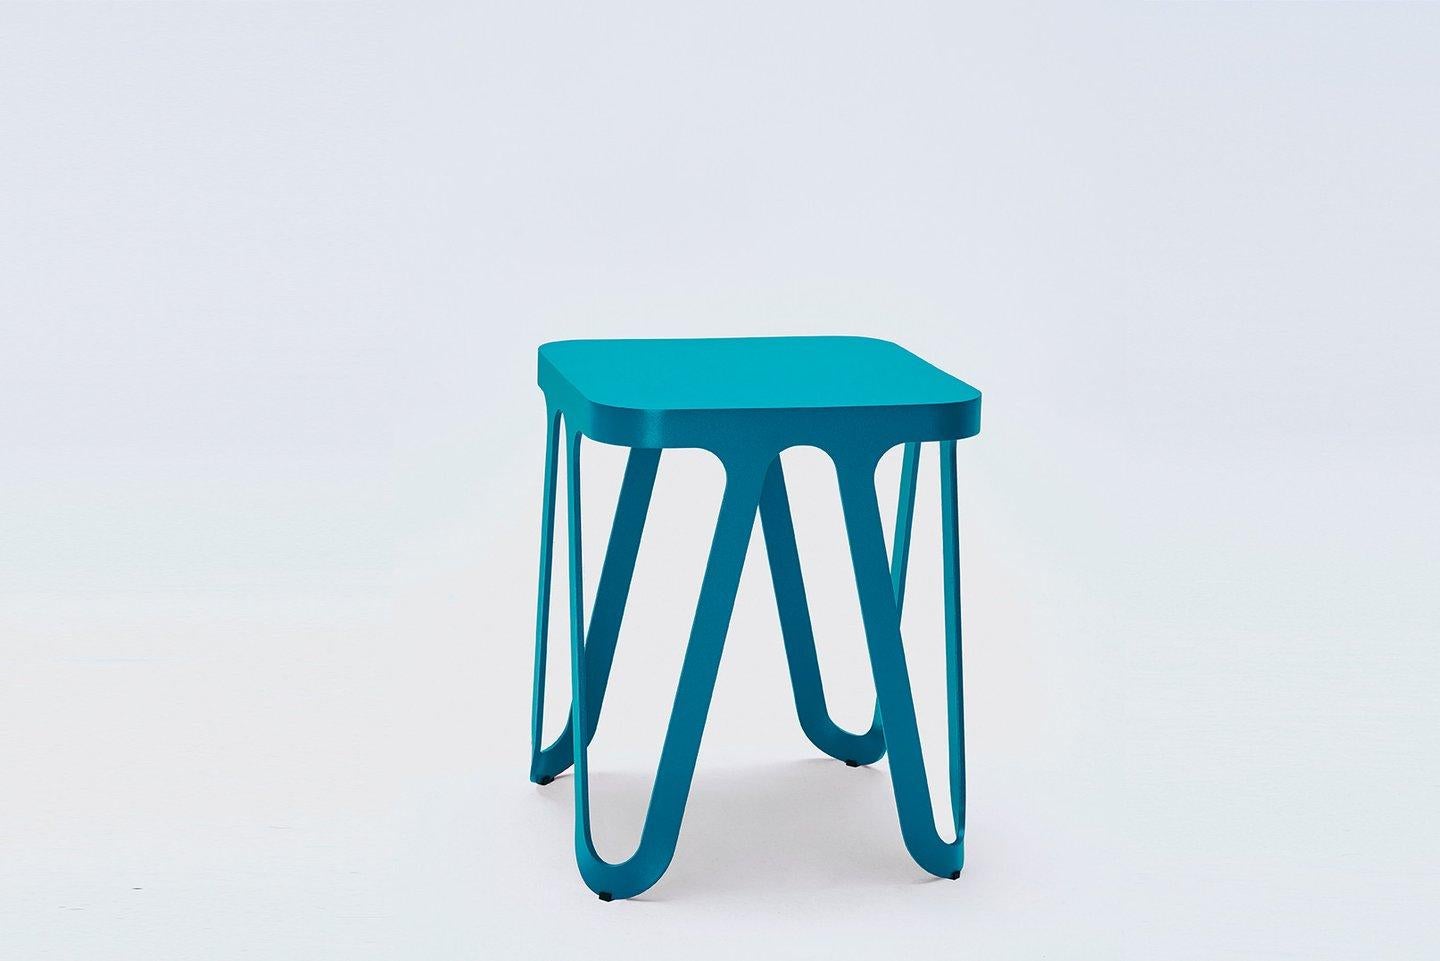 Black loop stool by Sebastian Scherer
Material: aluminium
Dimensions: 38 x 38 x 44 cm
Also available in wood
Colour: black
Also available in ocean blue, silk grey, quartz grey, coral red, lemon yellow, rose, signal white

The Loop series is